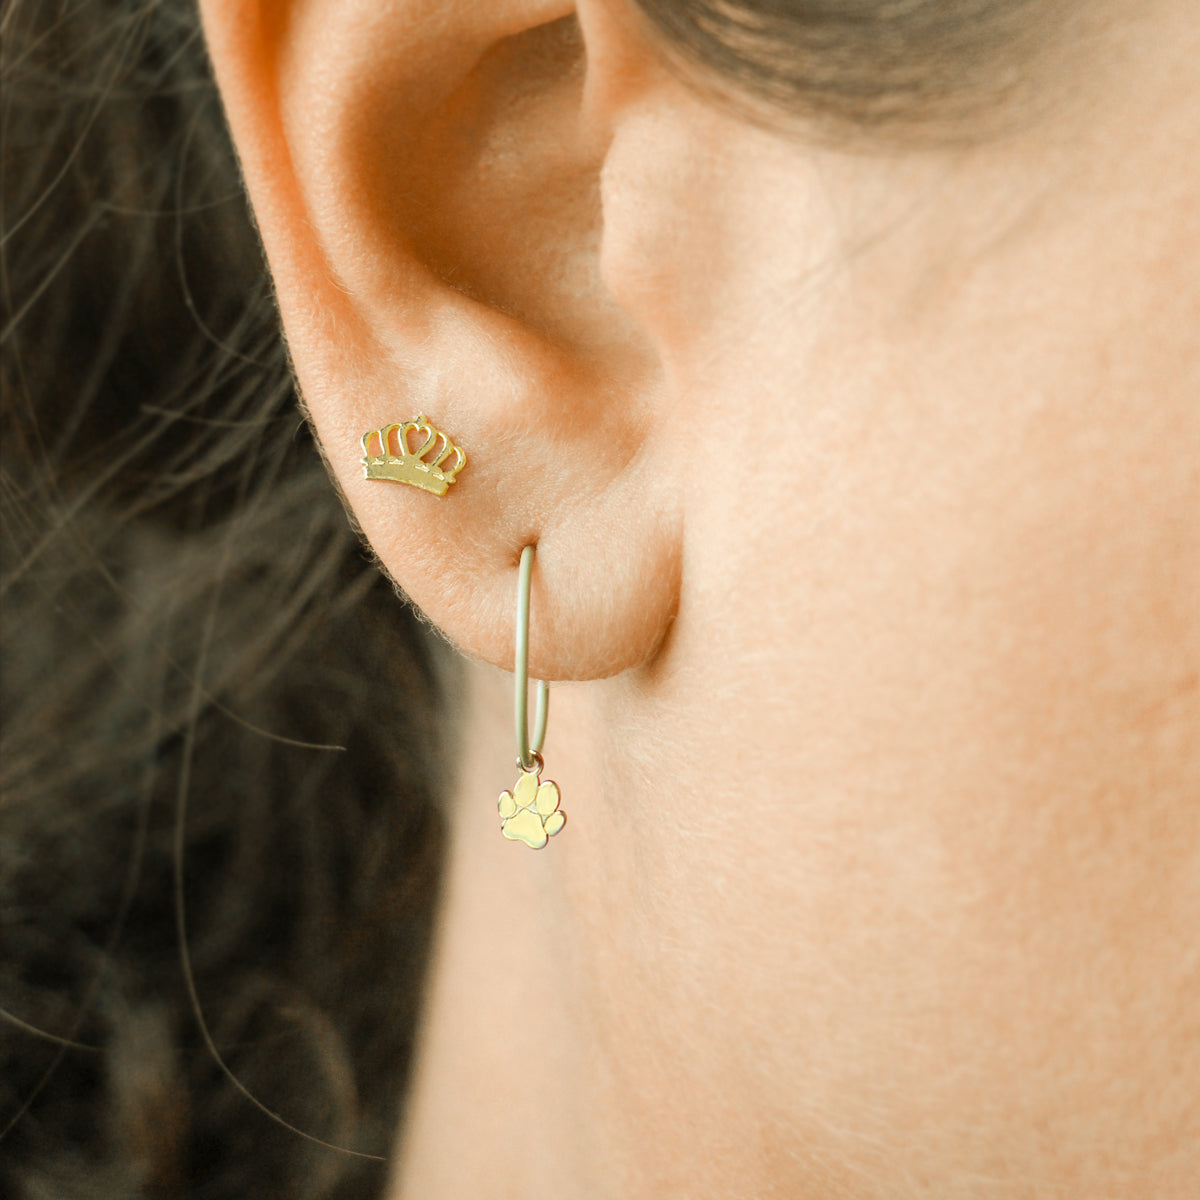 Single earring with paw and painted hoop - ORO18KT